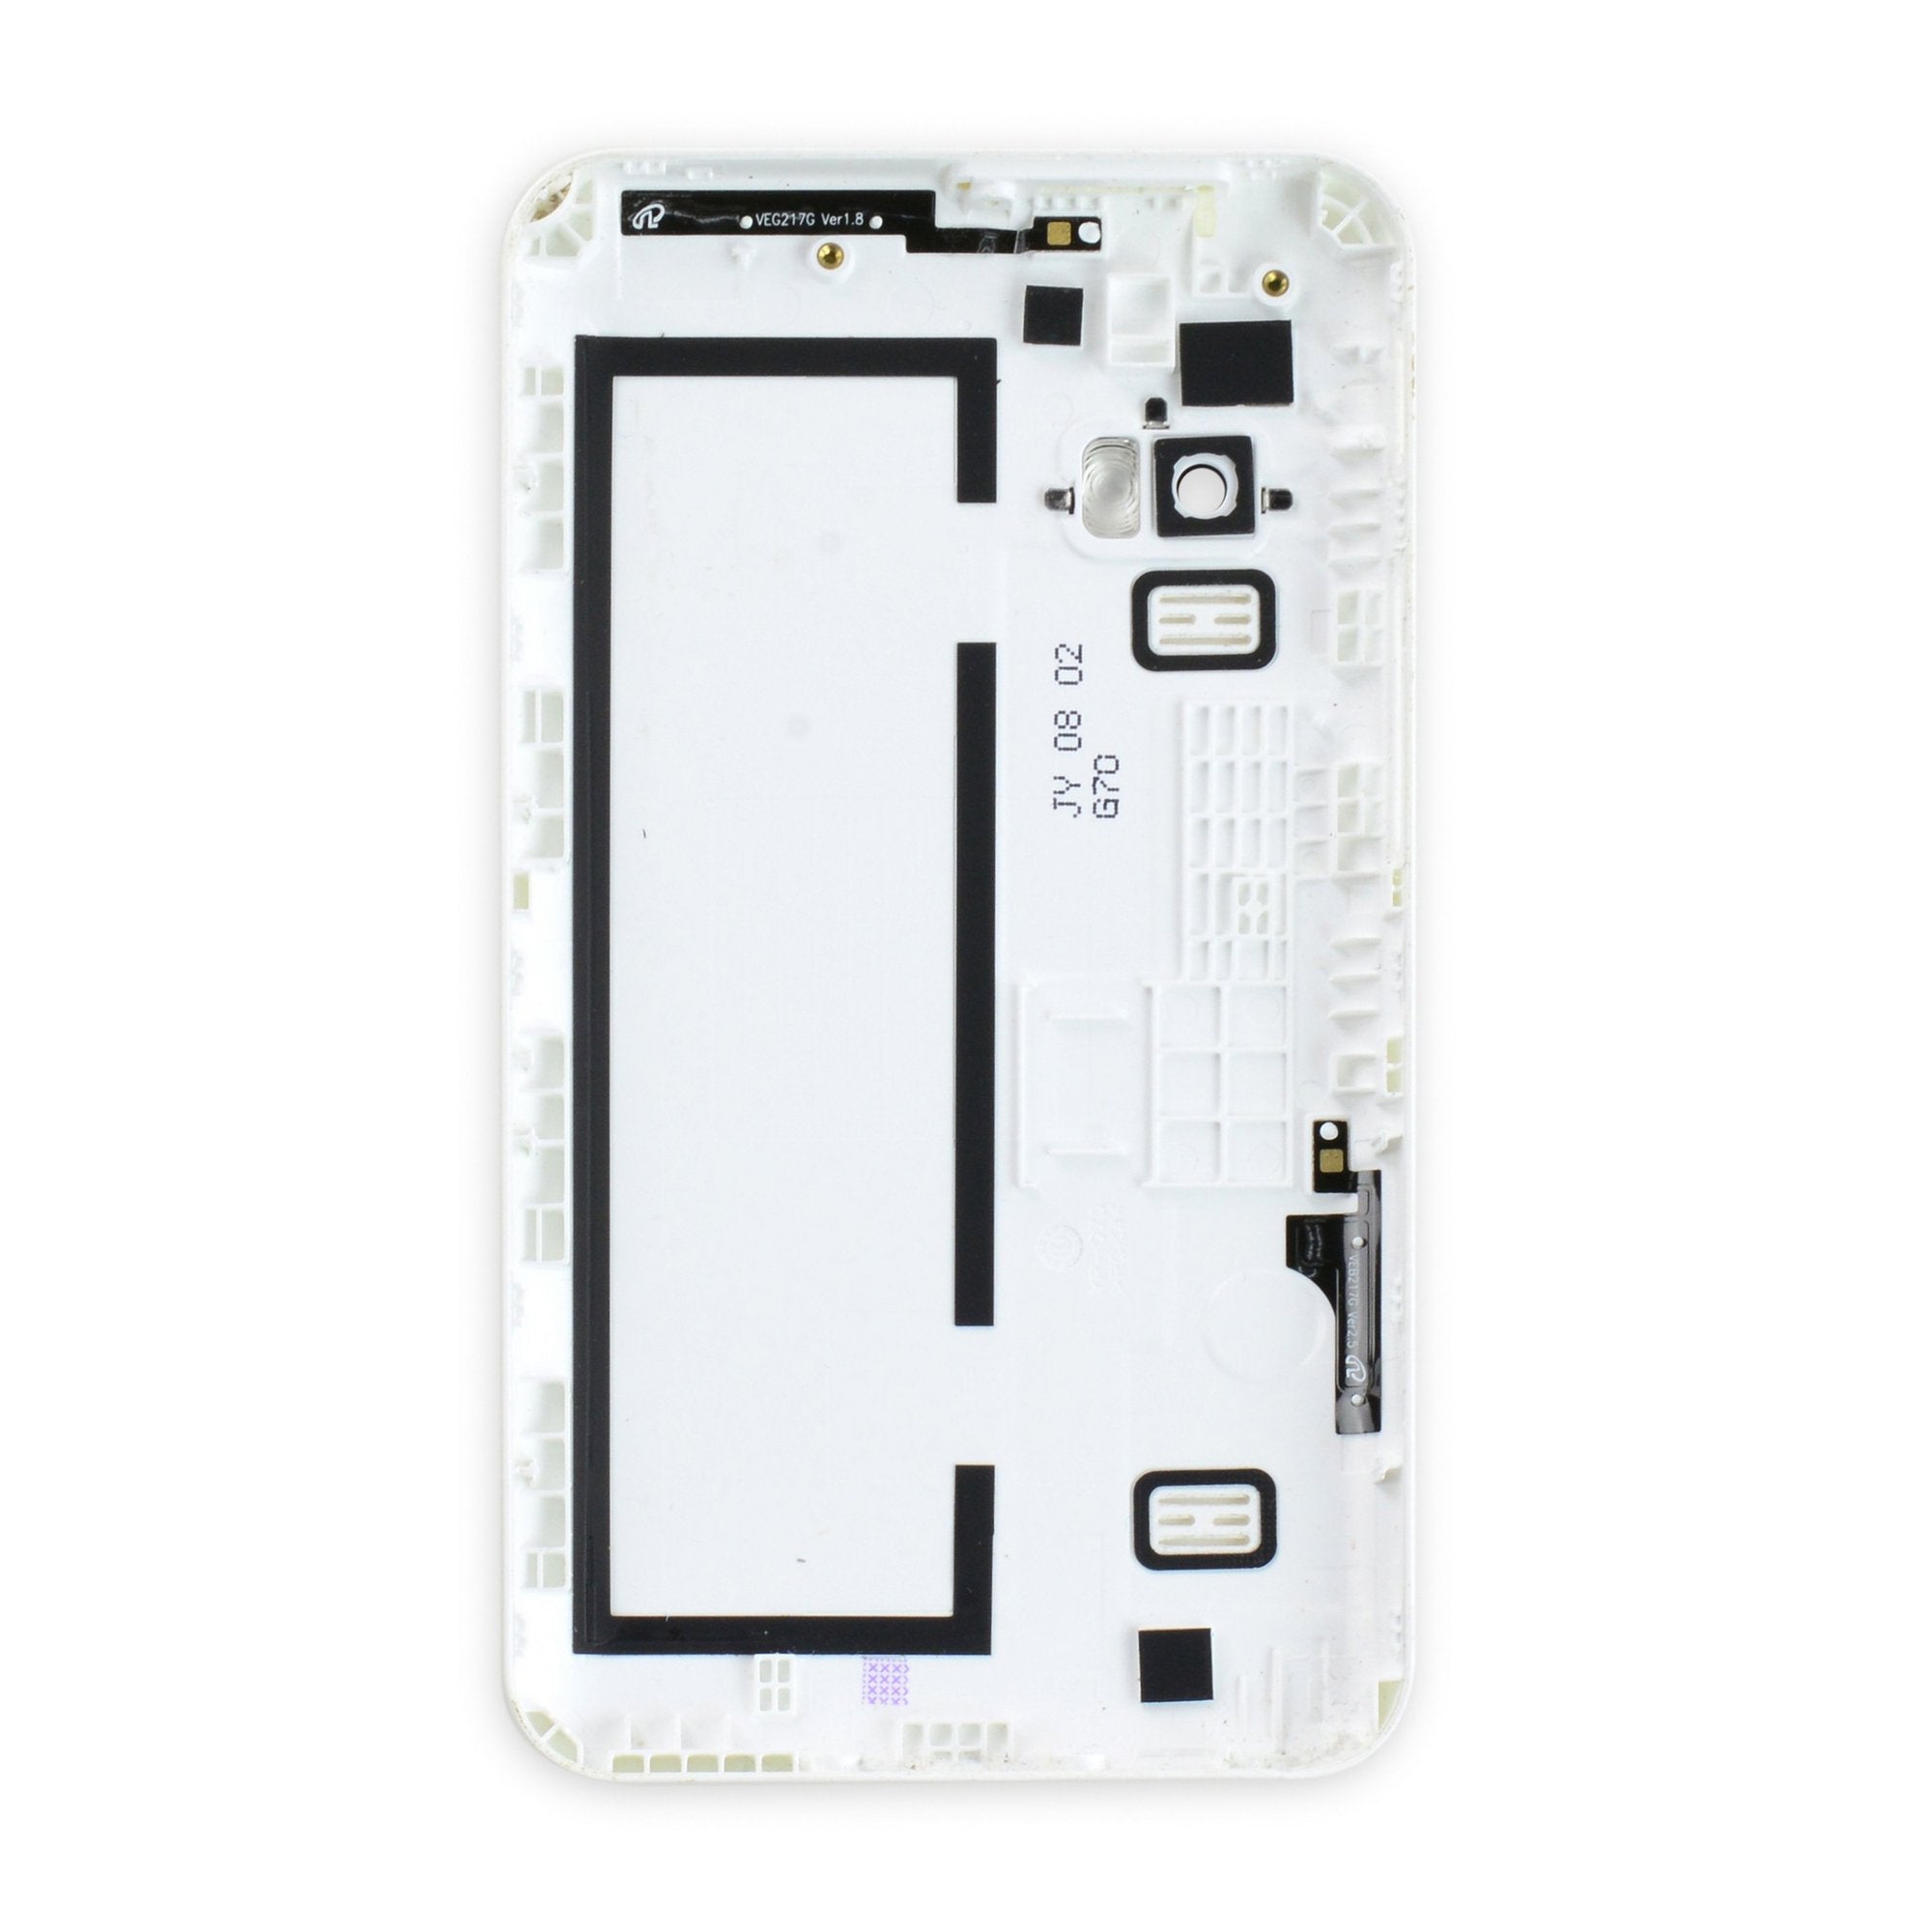 Galaxy Player 5.0 Rear Panel White Used, A-Stock